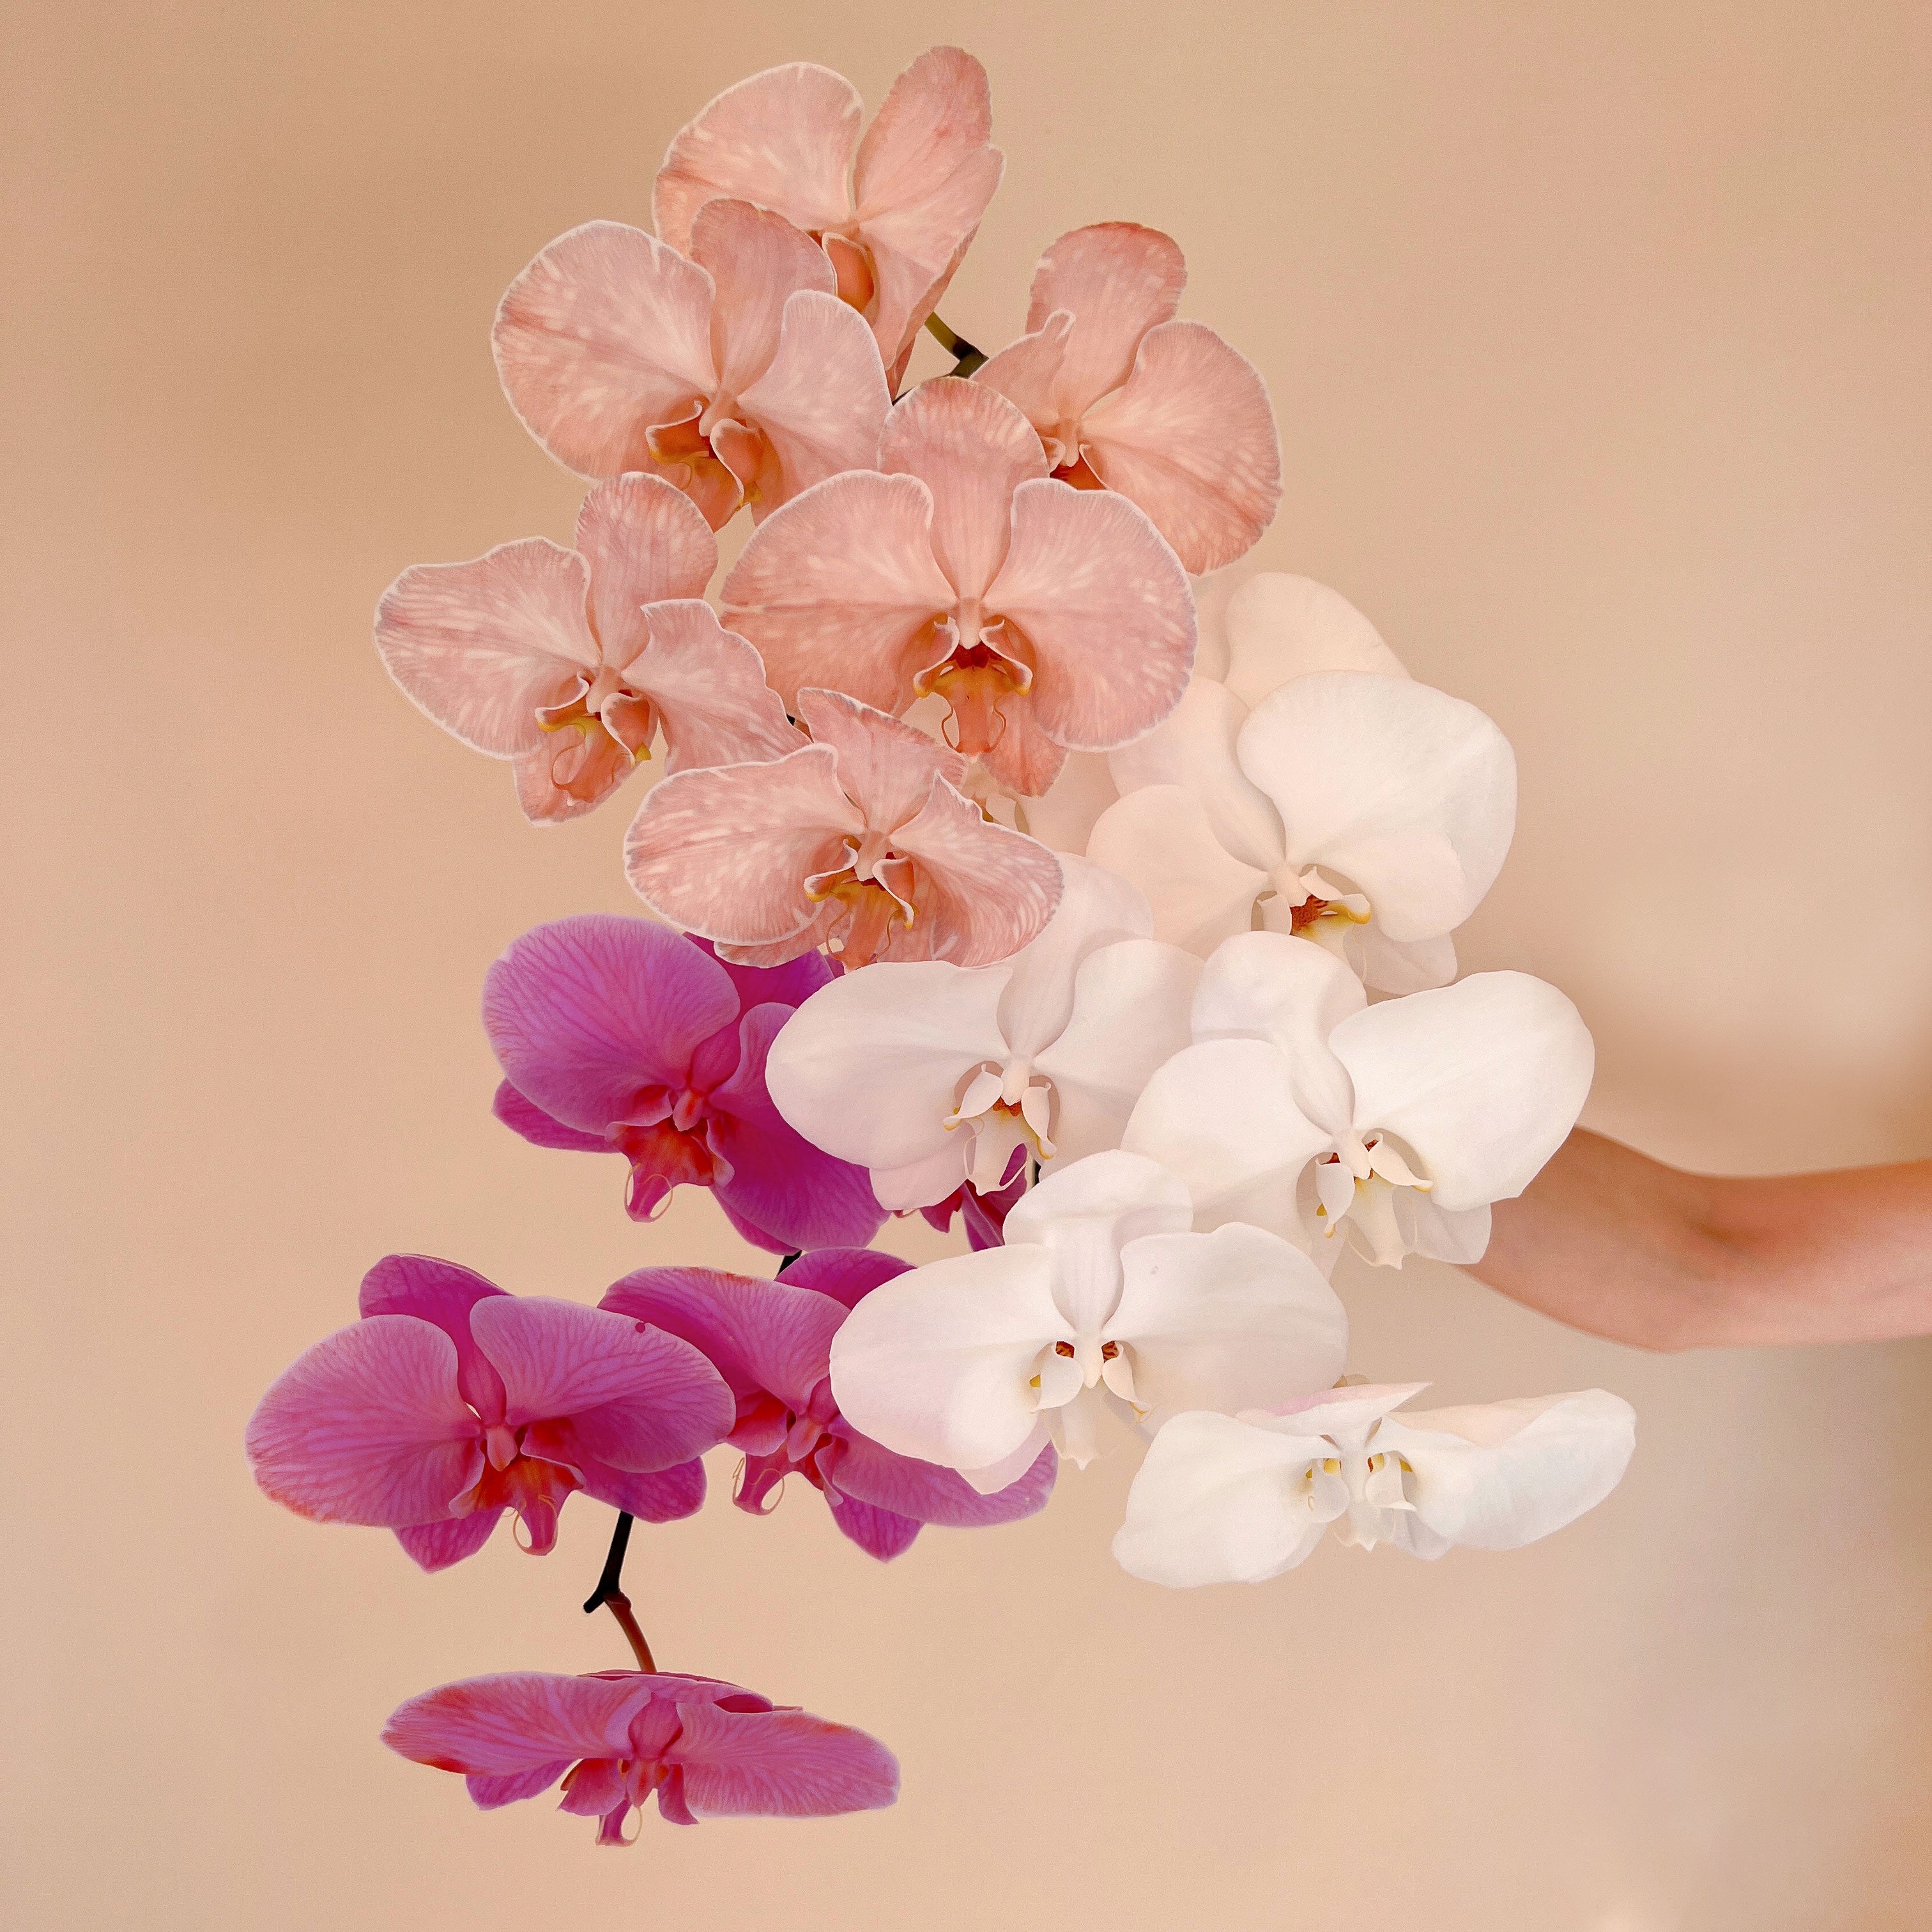 Add an additional Orchid Stem to your bouquet